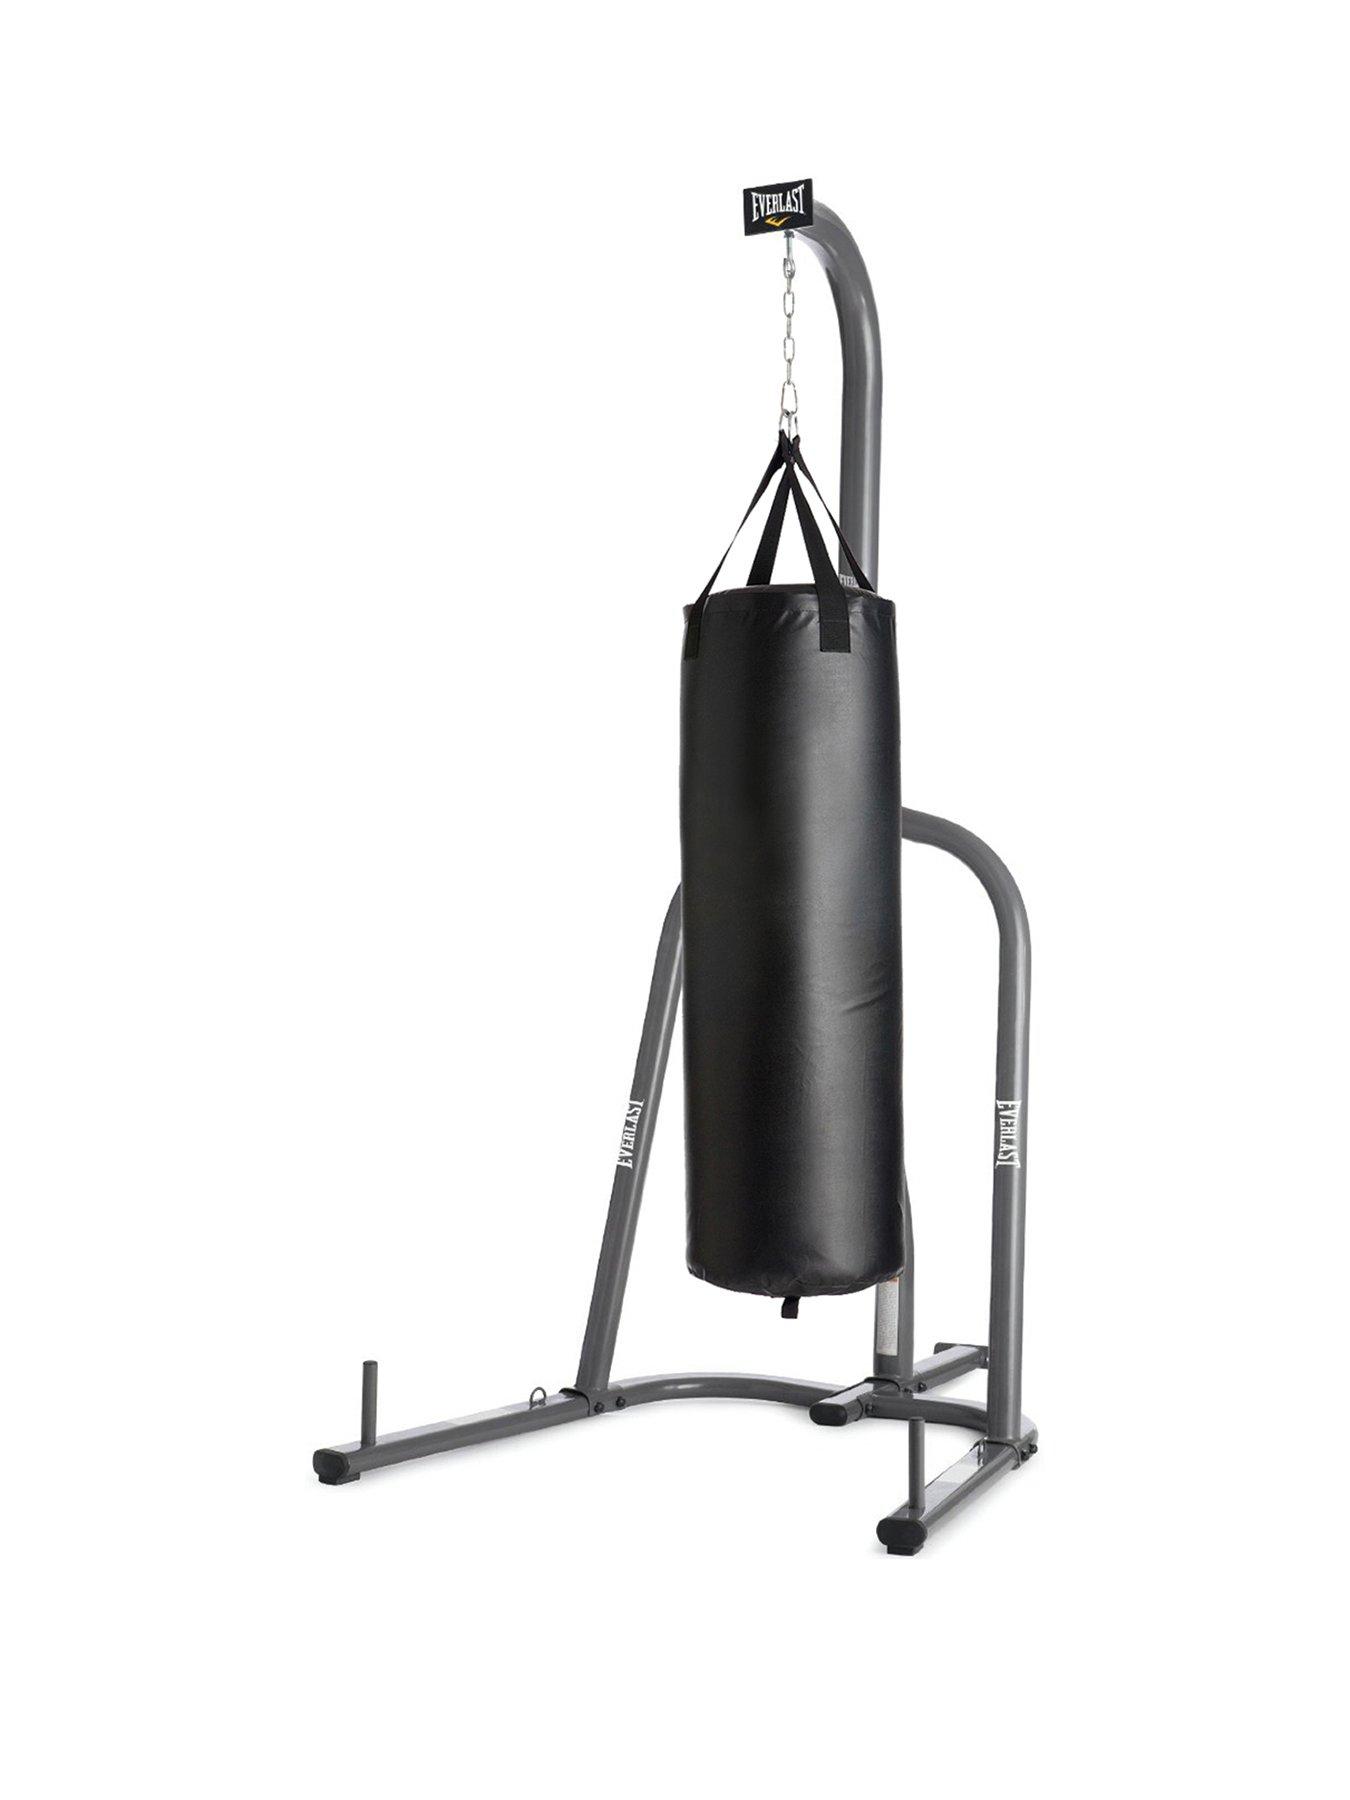 Everlast Heavy Punch Bag Stand and Bag | 0